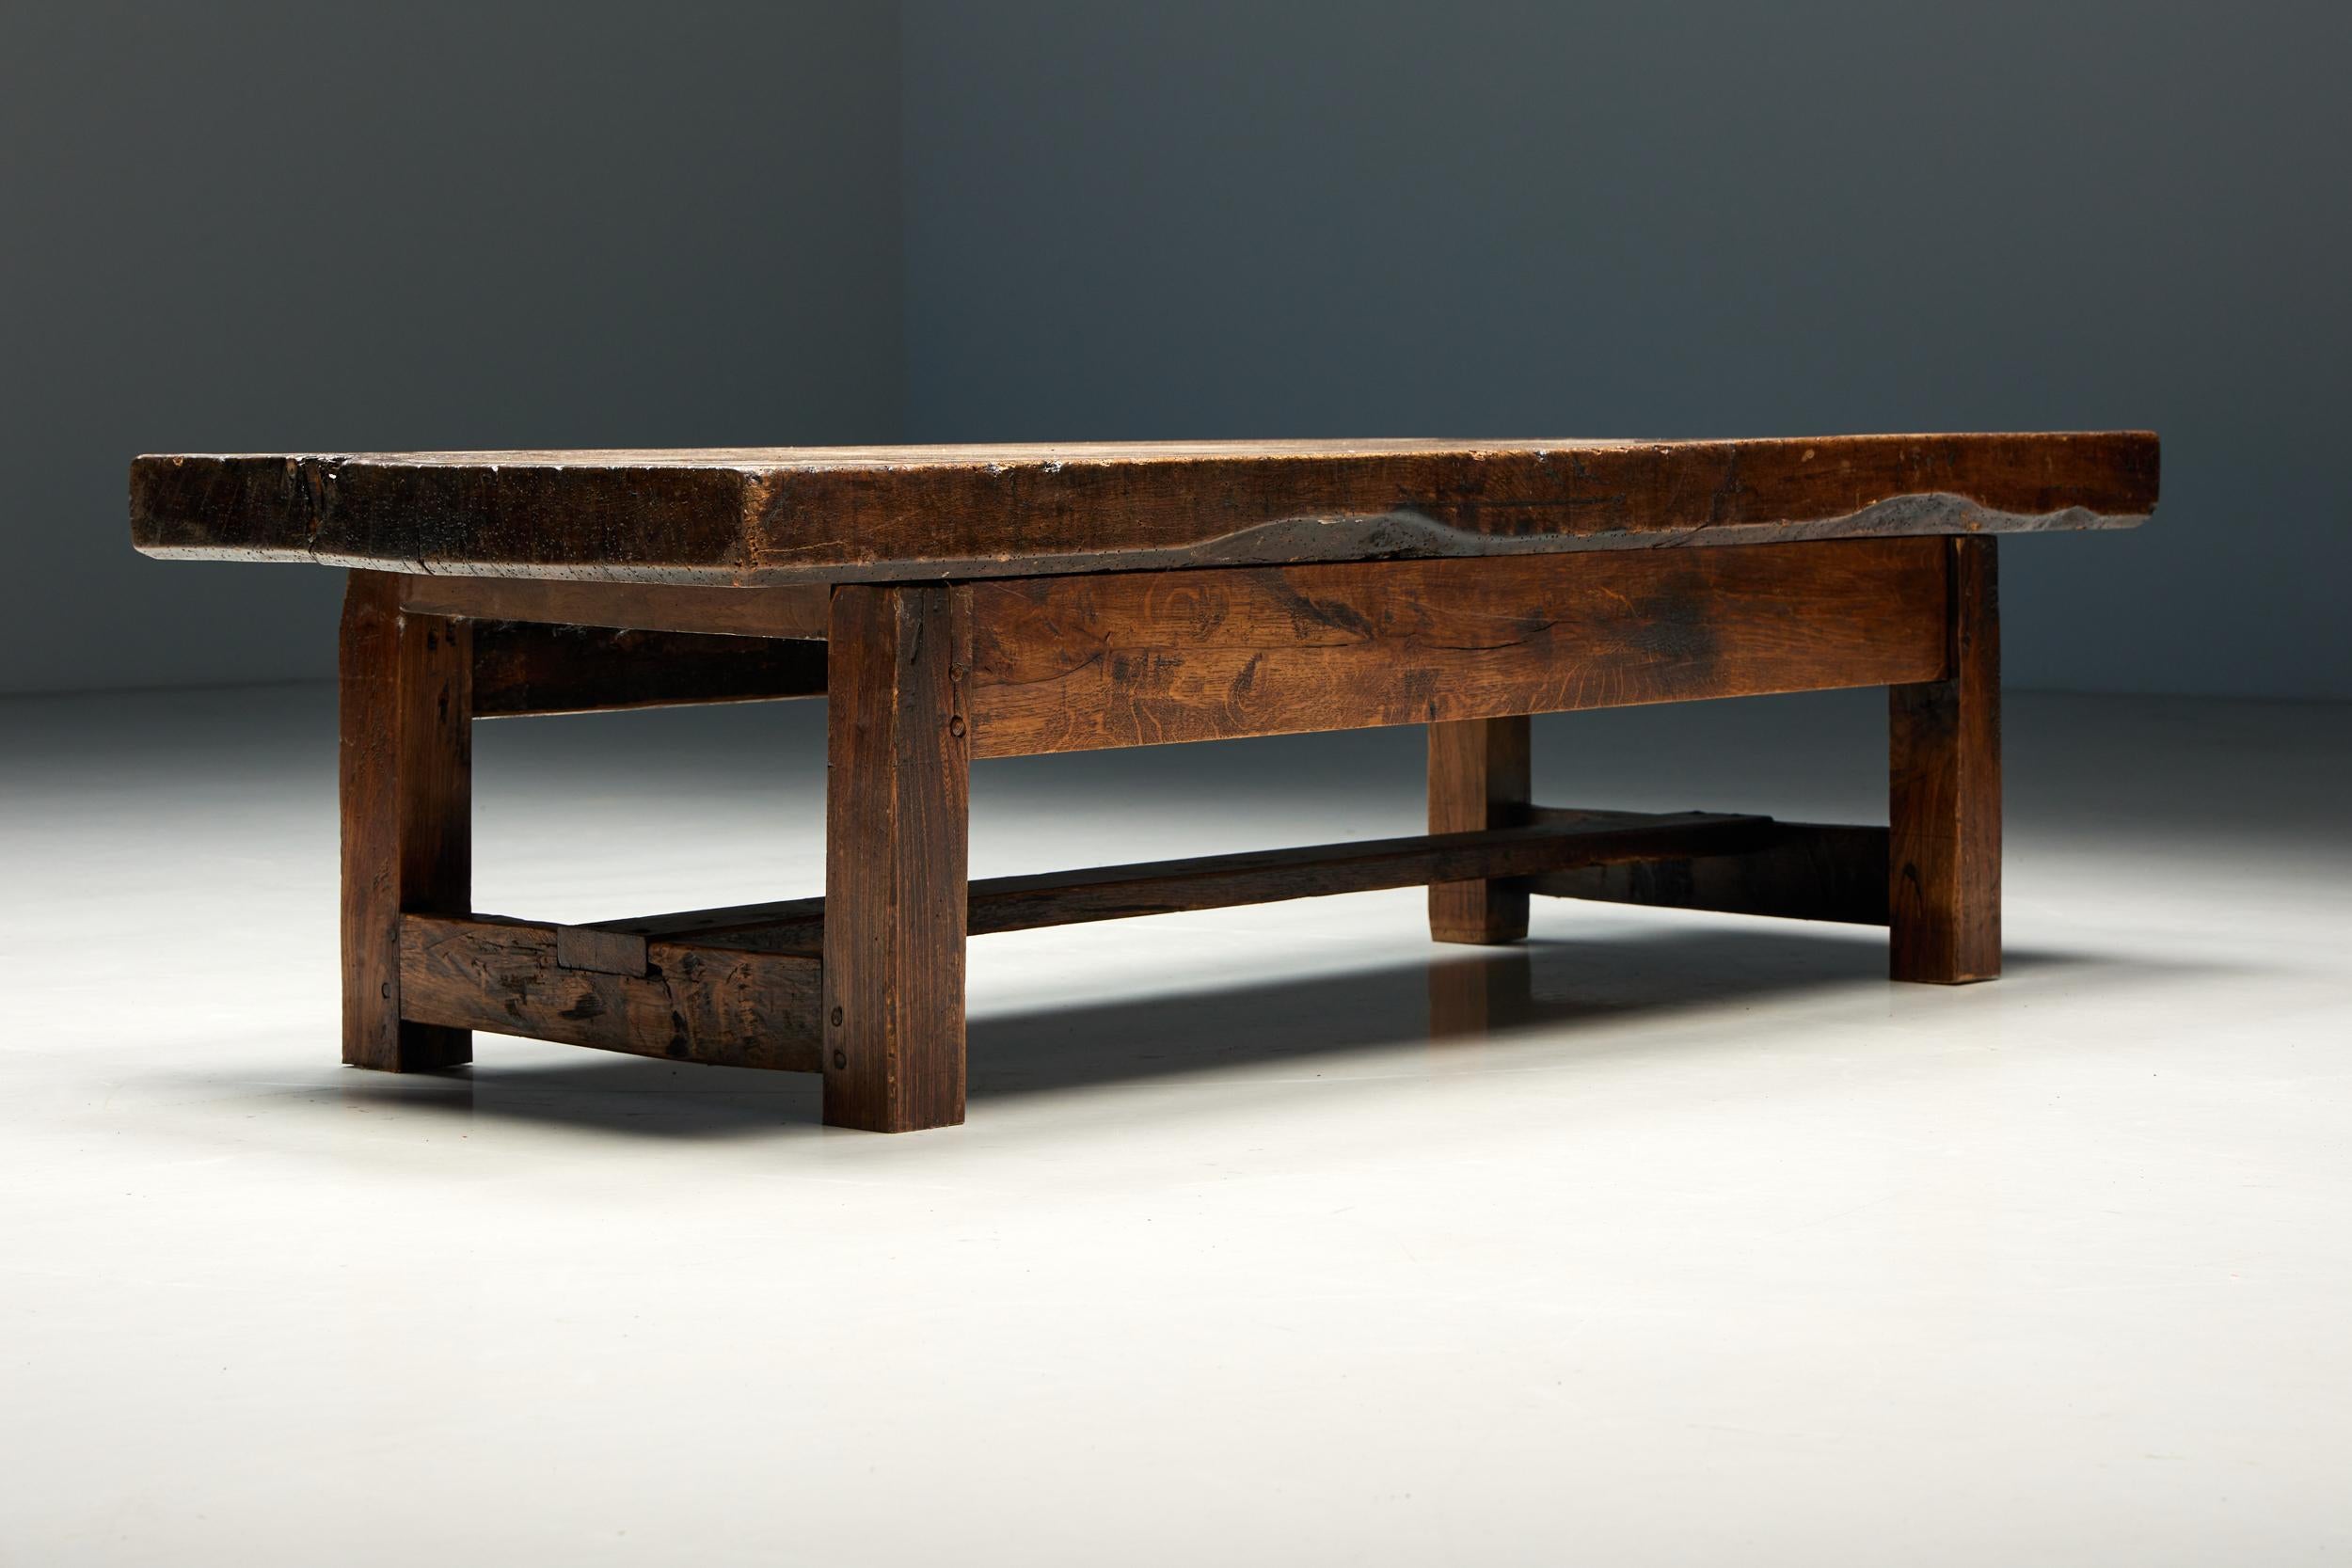 Rustic Robust Wooden Rectangular Coffee Table, France, 1940s